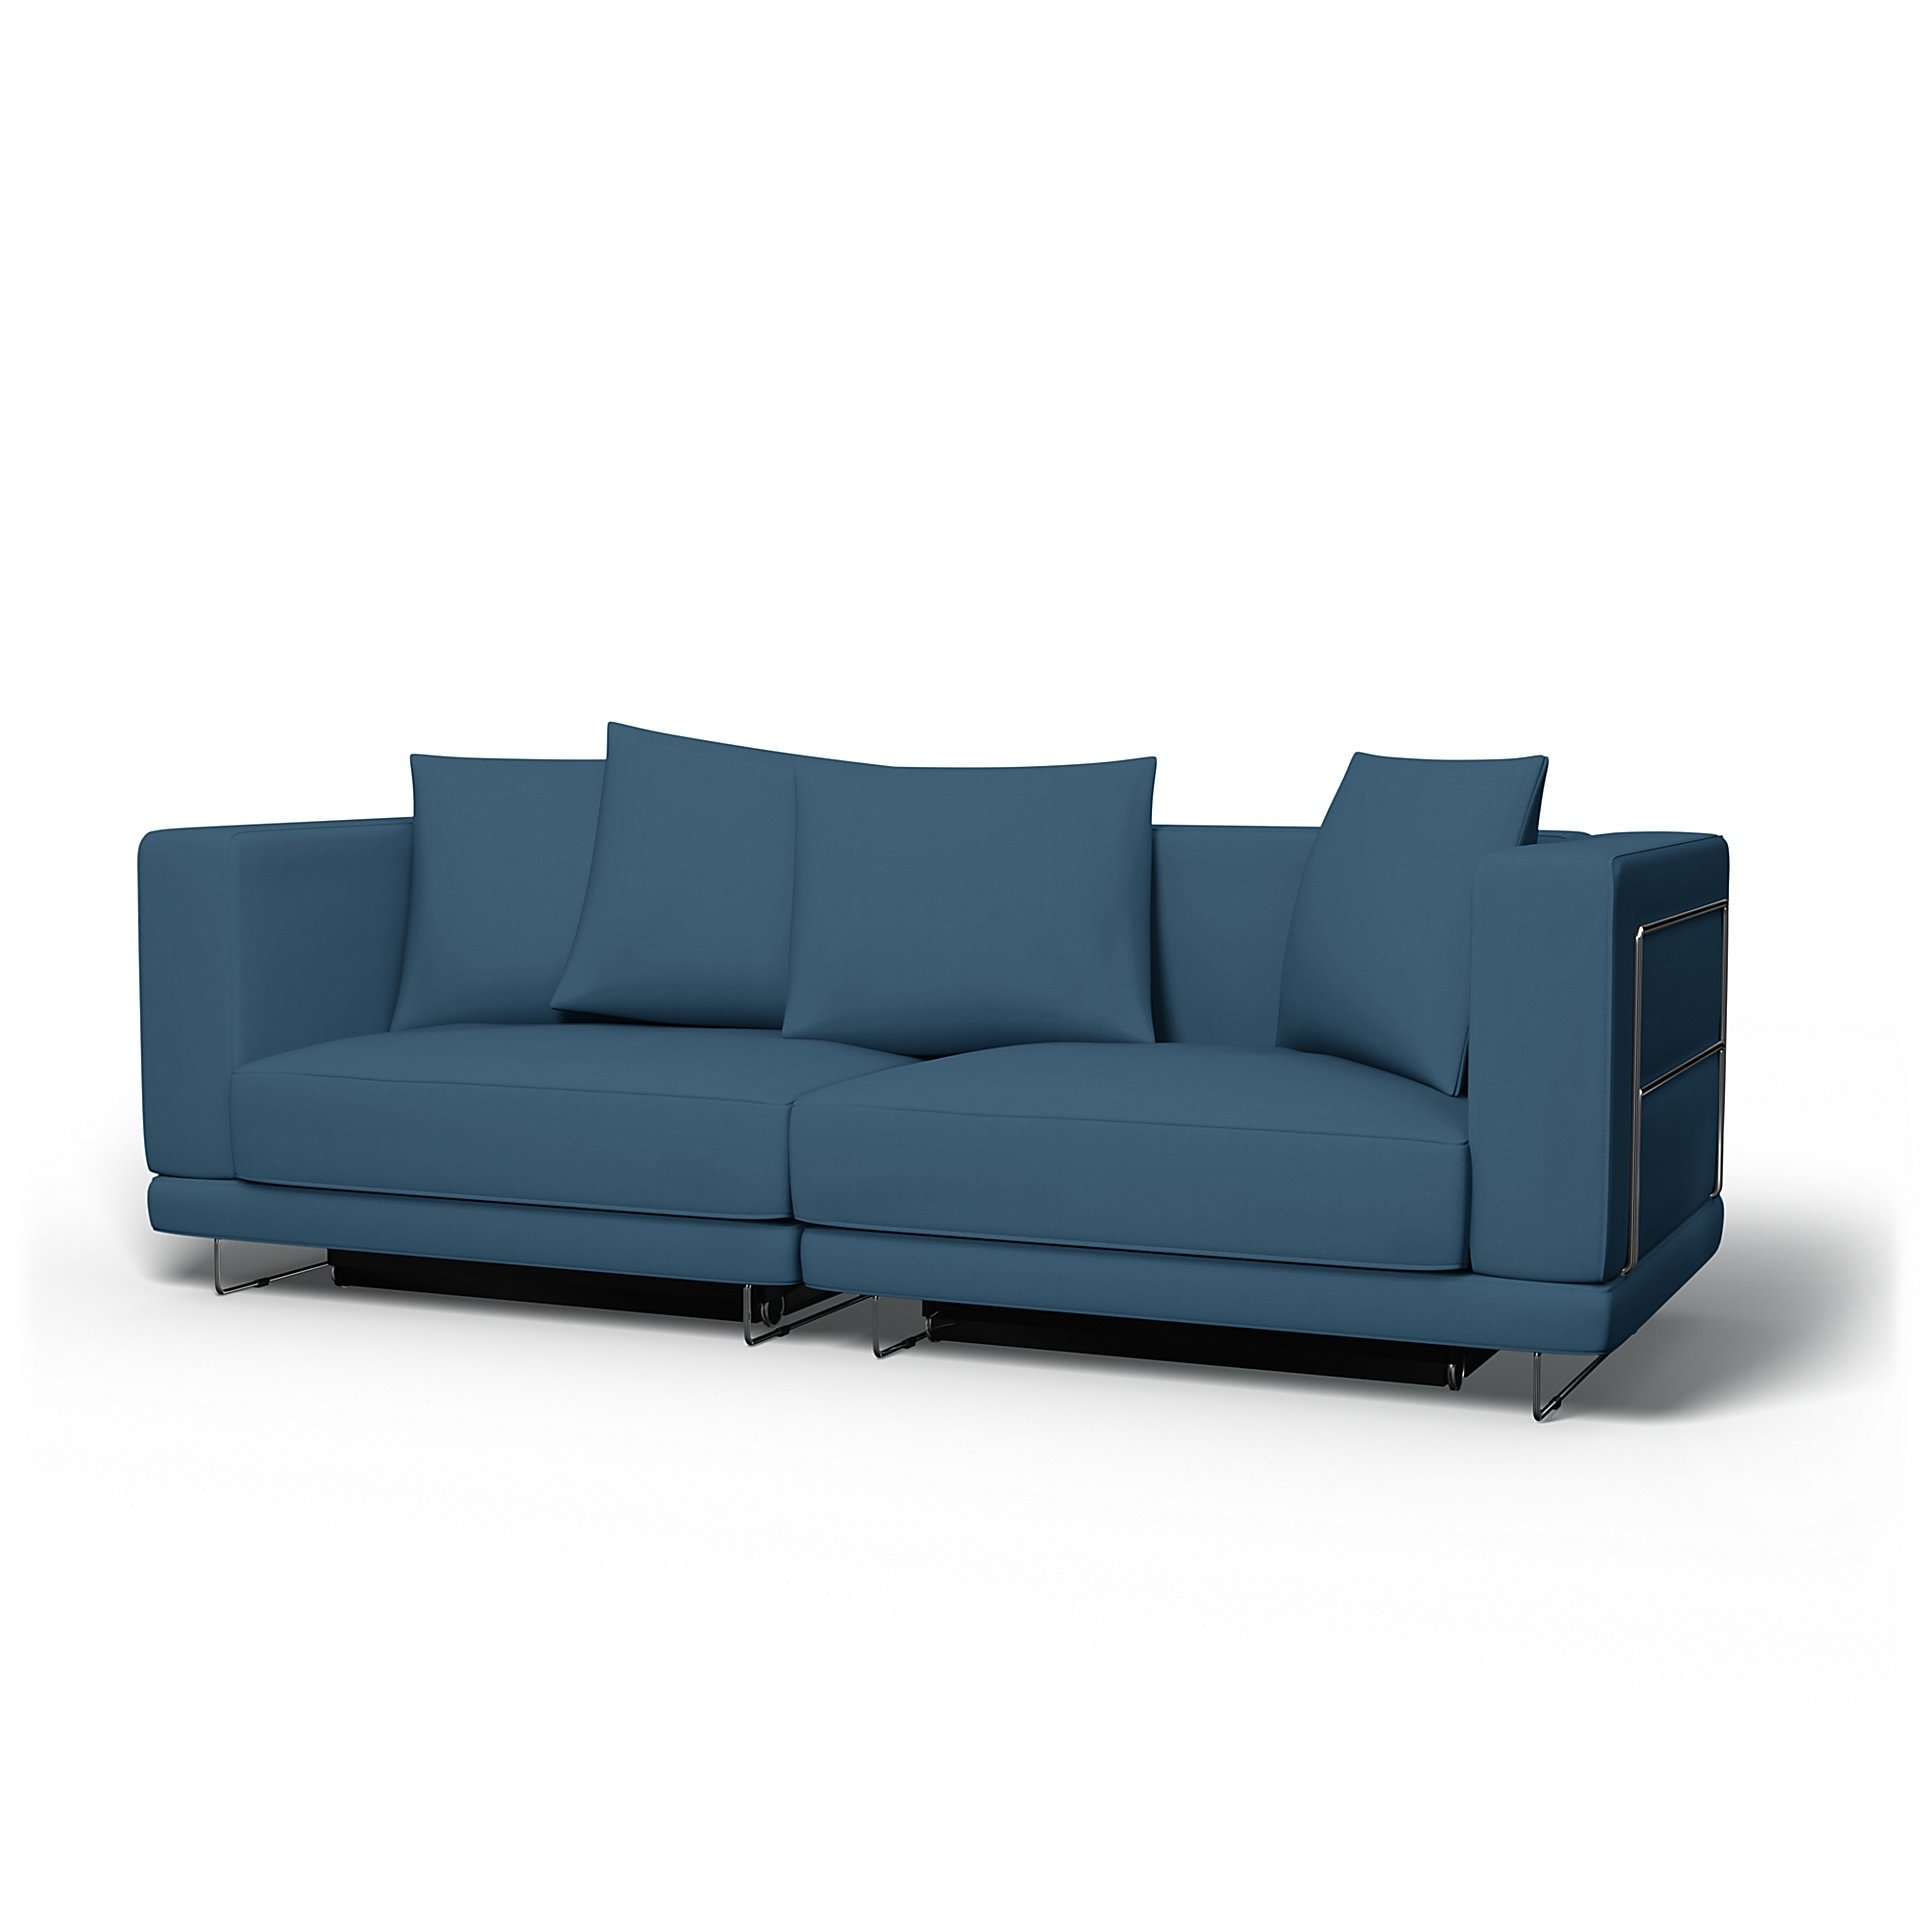 IKEA - Tylosand Sofa Bed Cover, Real Teal, Cotton - Bemz